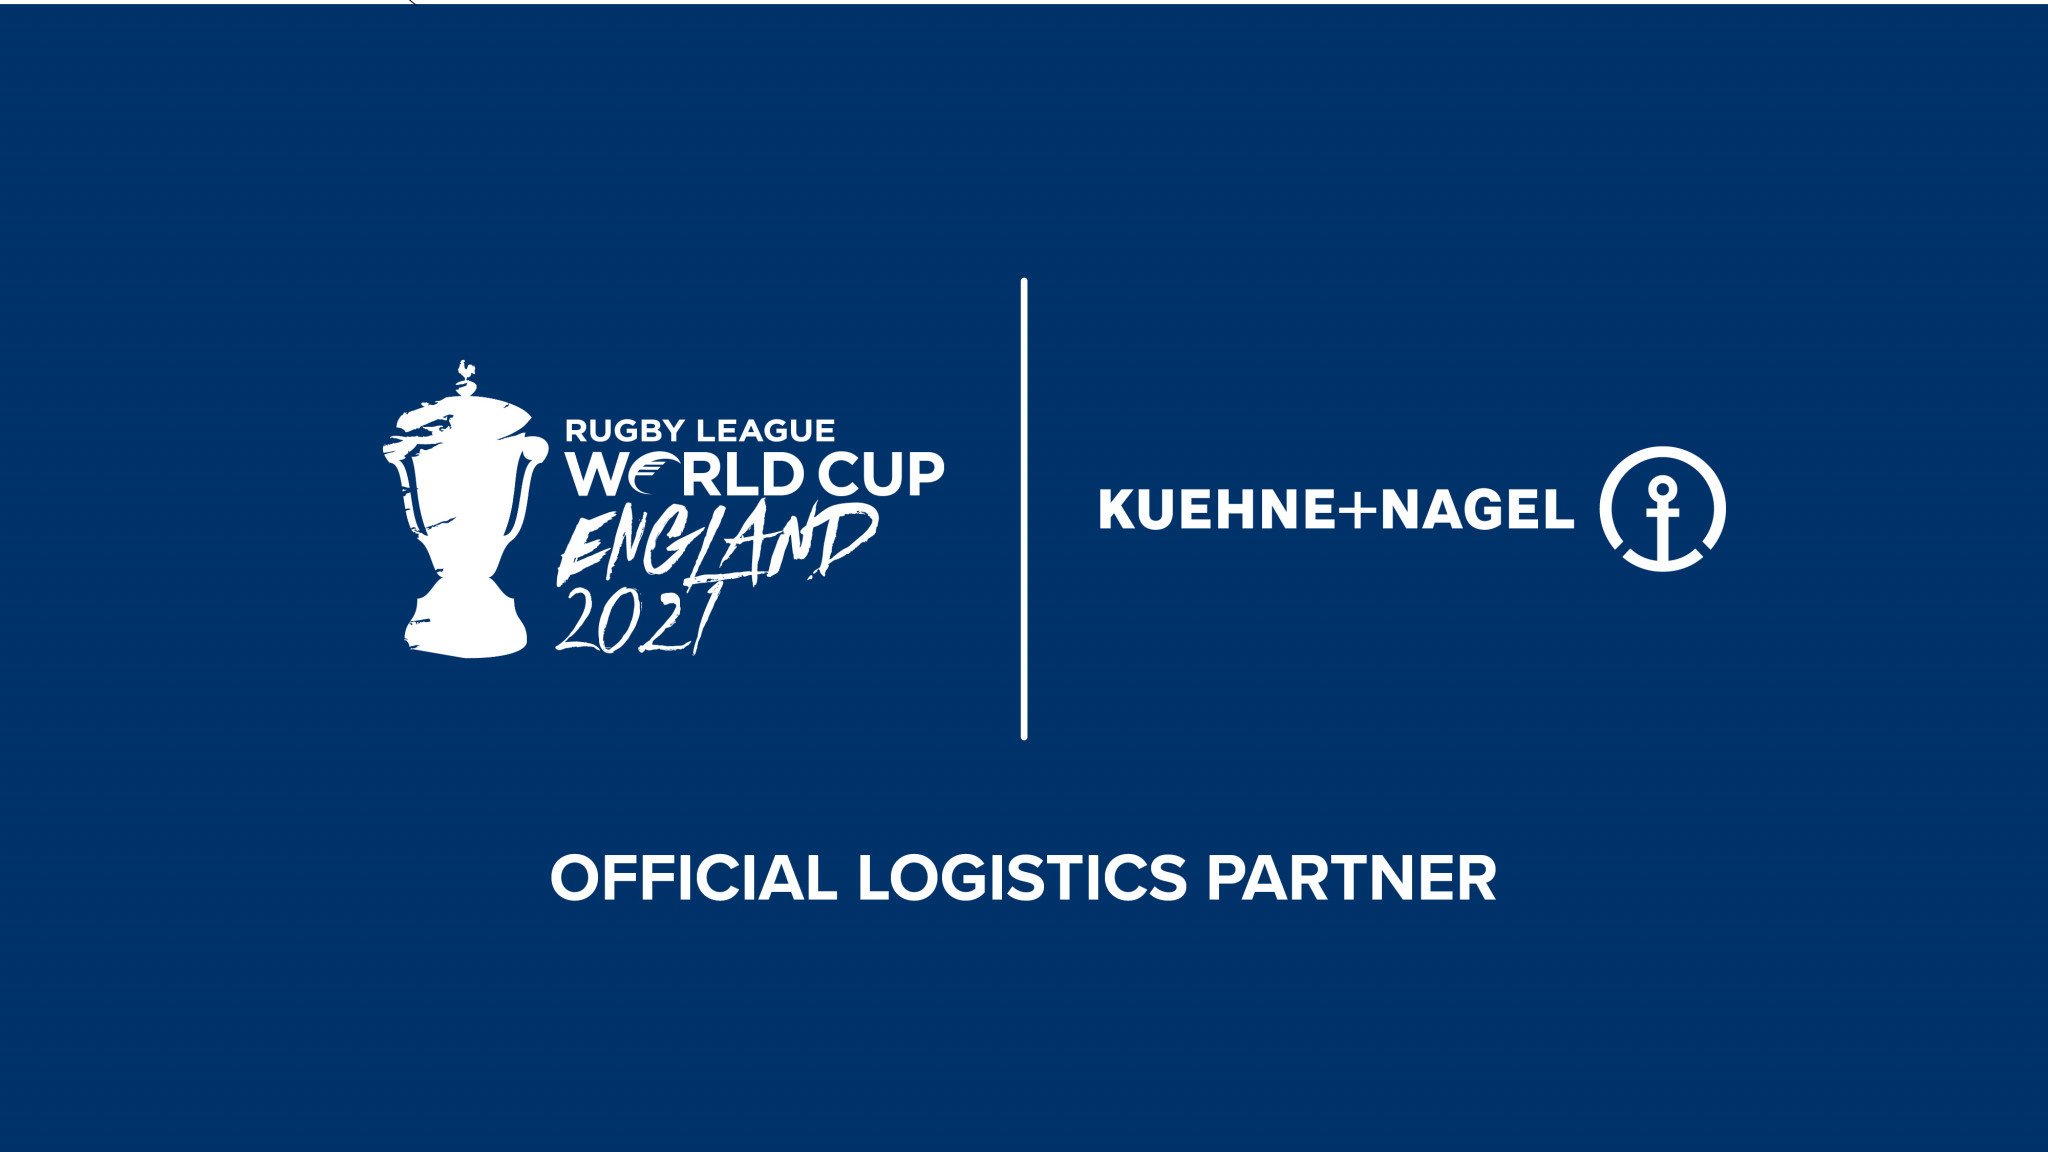 Global transport and logistics company Kuehne+Nagel has been announced as the official logistics partner for the Rugby League World Cup 2021 ©RLWC2021